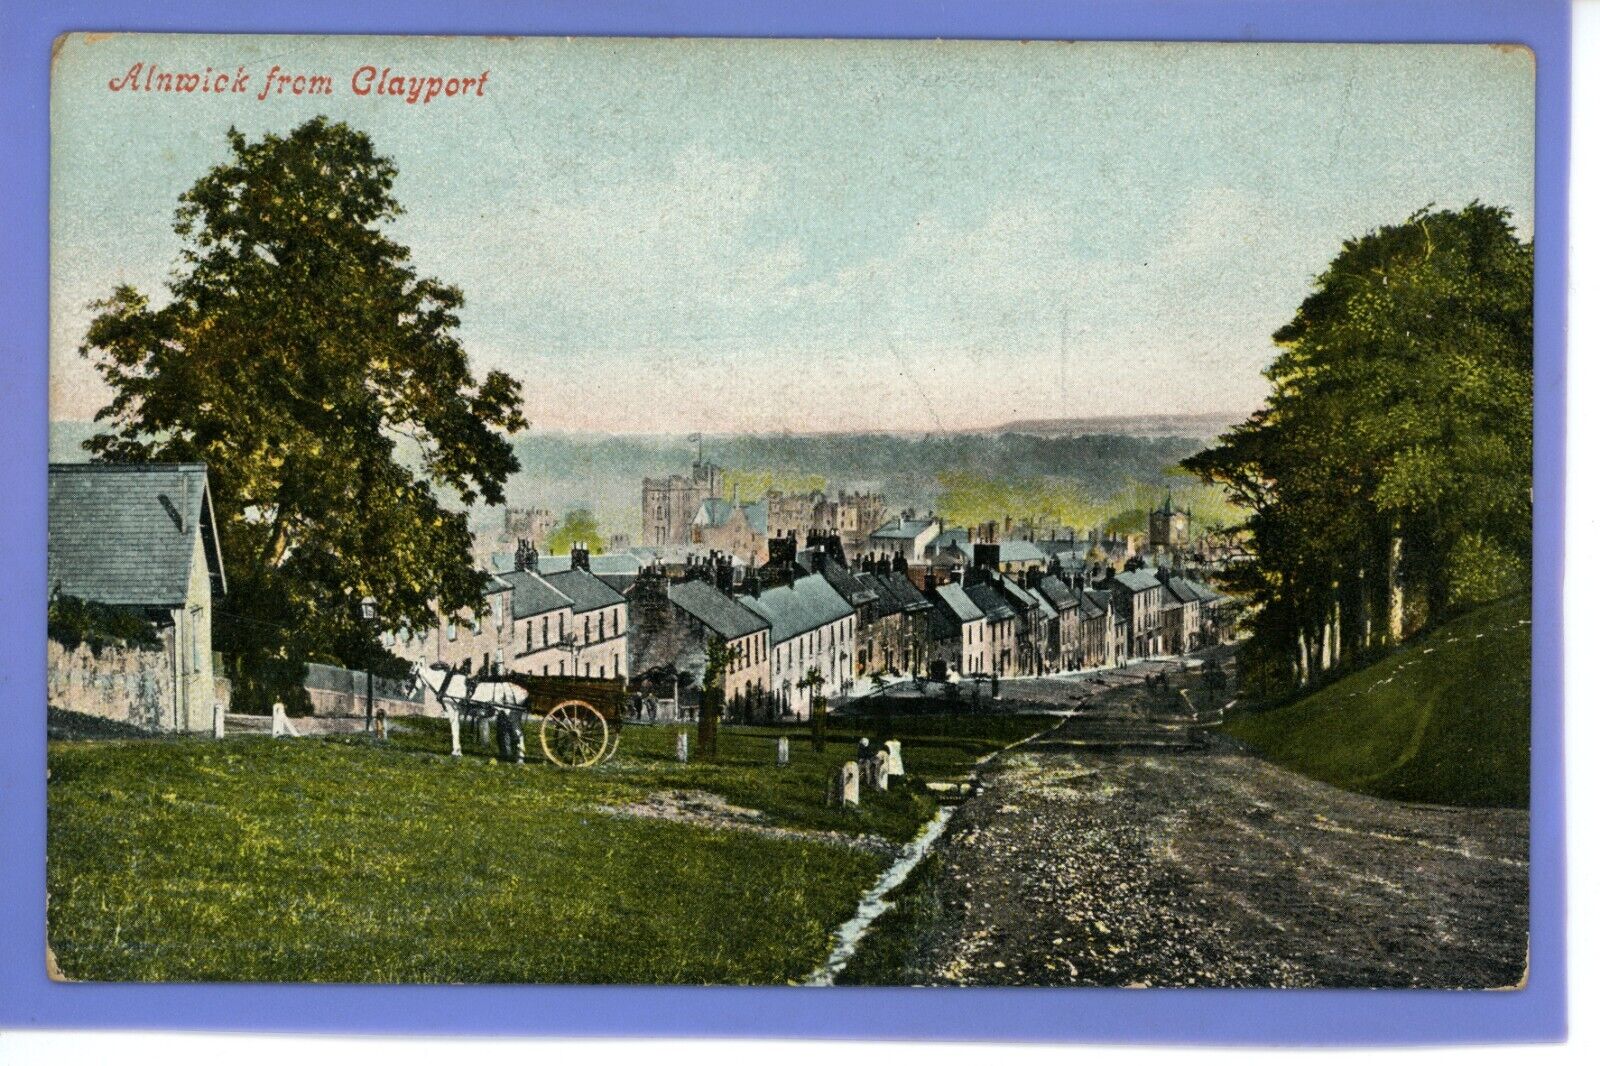 OLD VINTAGE POSTCARD ALNWICK FROM CLAYPORT NORTHUMBERLAND HORSE & CART